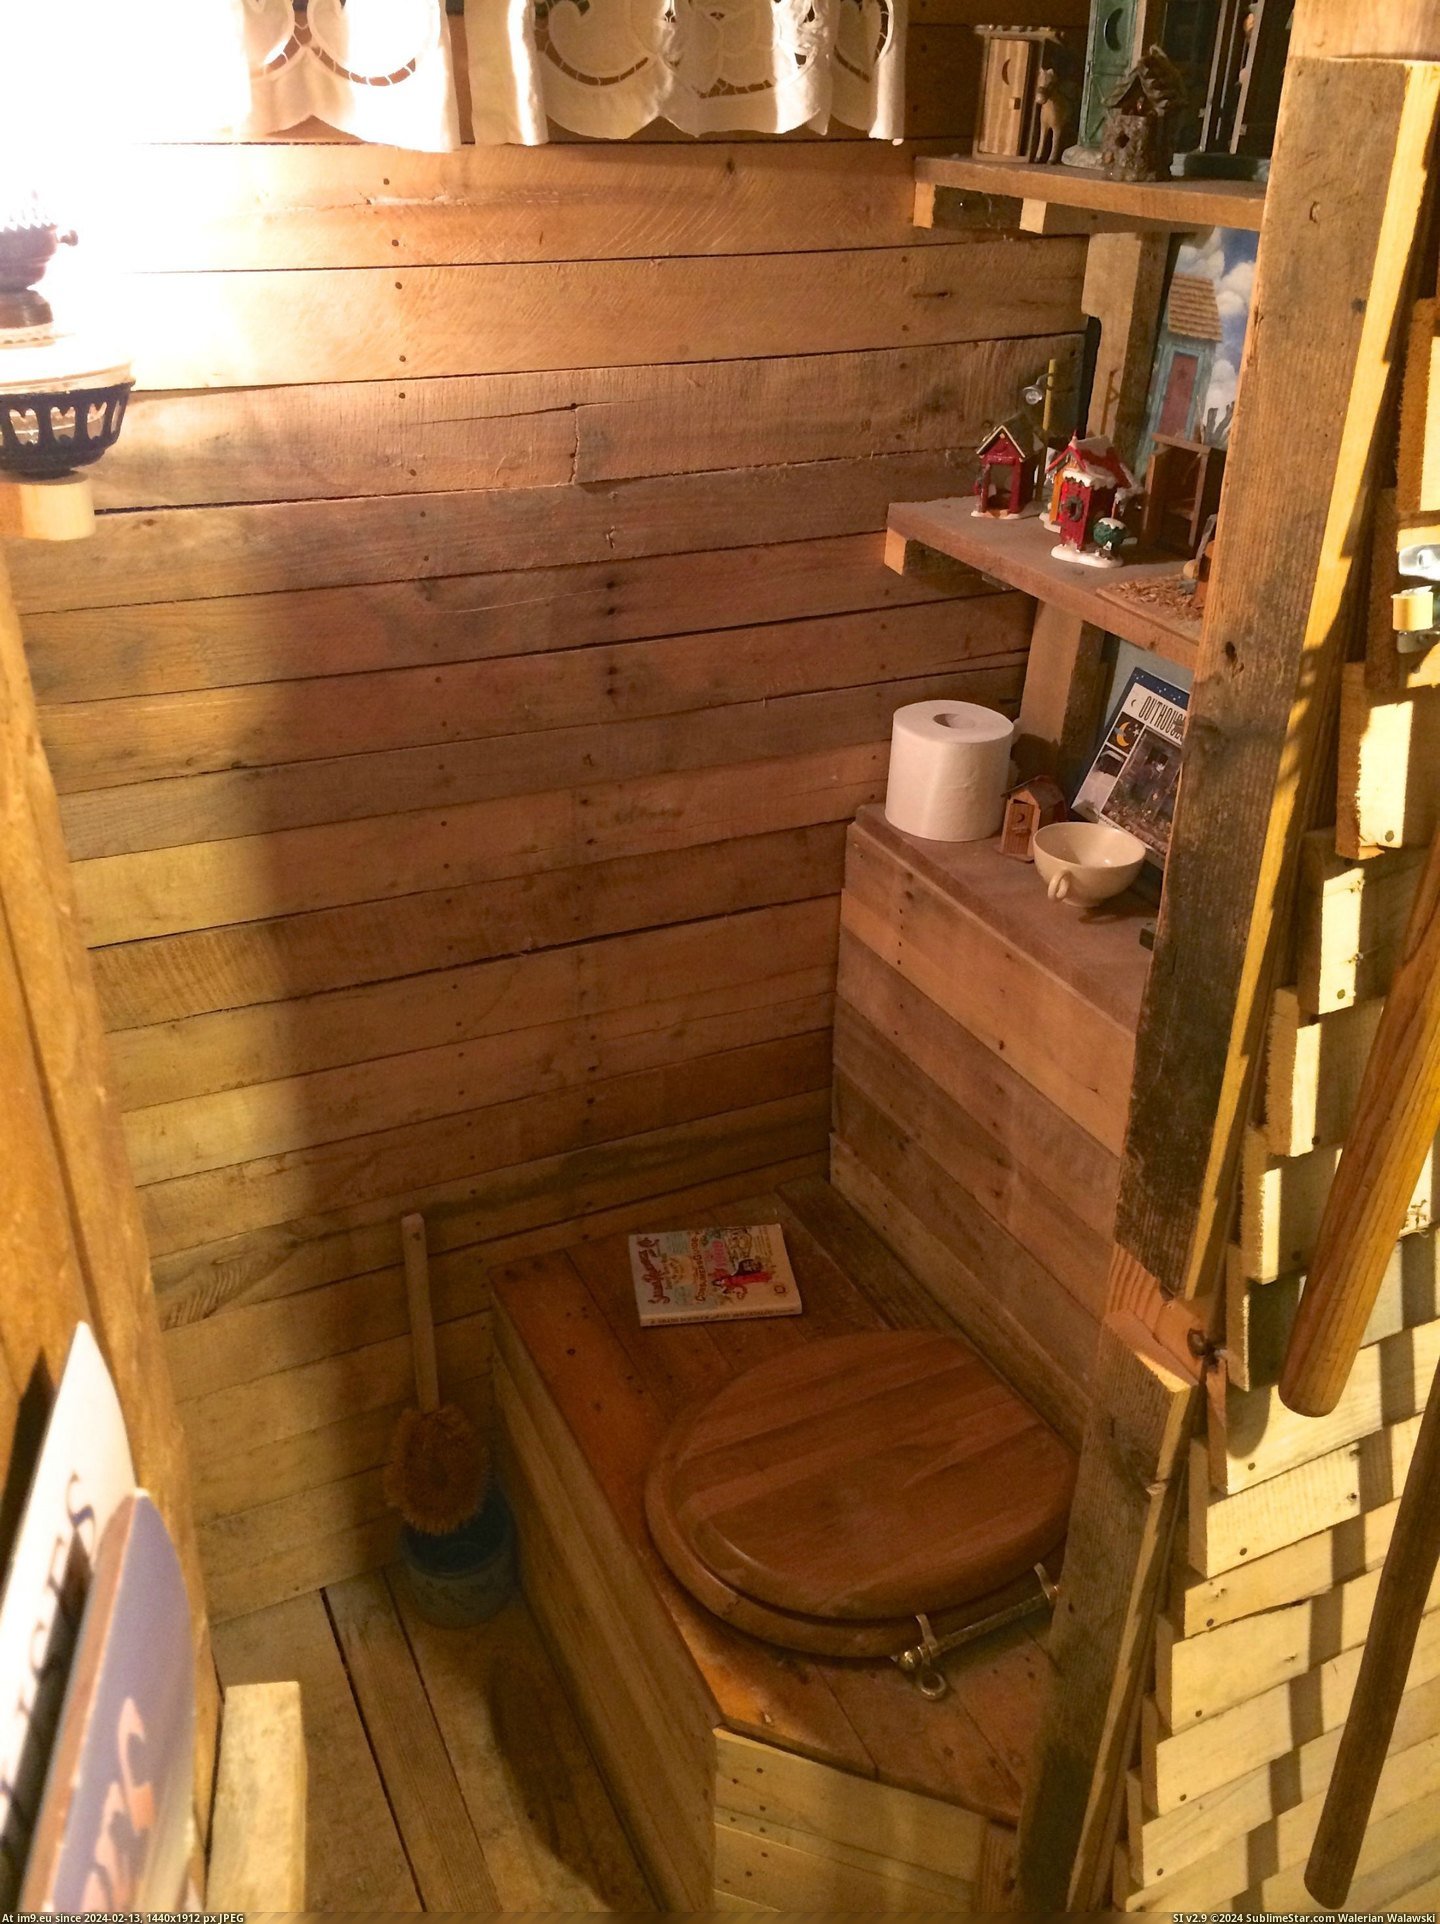 #Guys #Dad #Isn #Basement #Told #Built [Pics] My dad isn't on Reddit, but I told him you guys would appreciate the outhouse he built in their basement. 8 Pic. (Obraz z album My r/PICS favs))